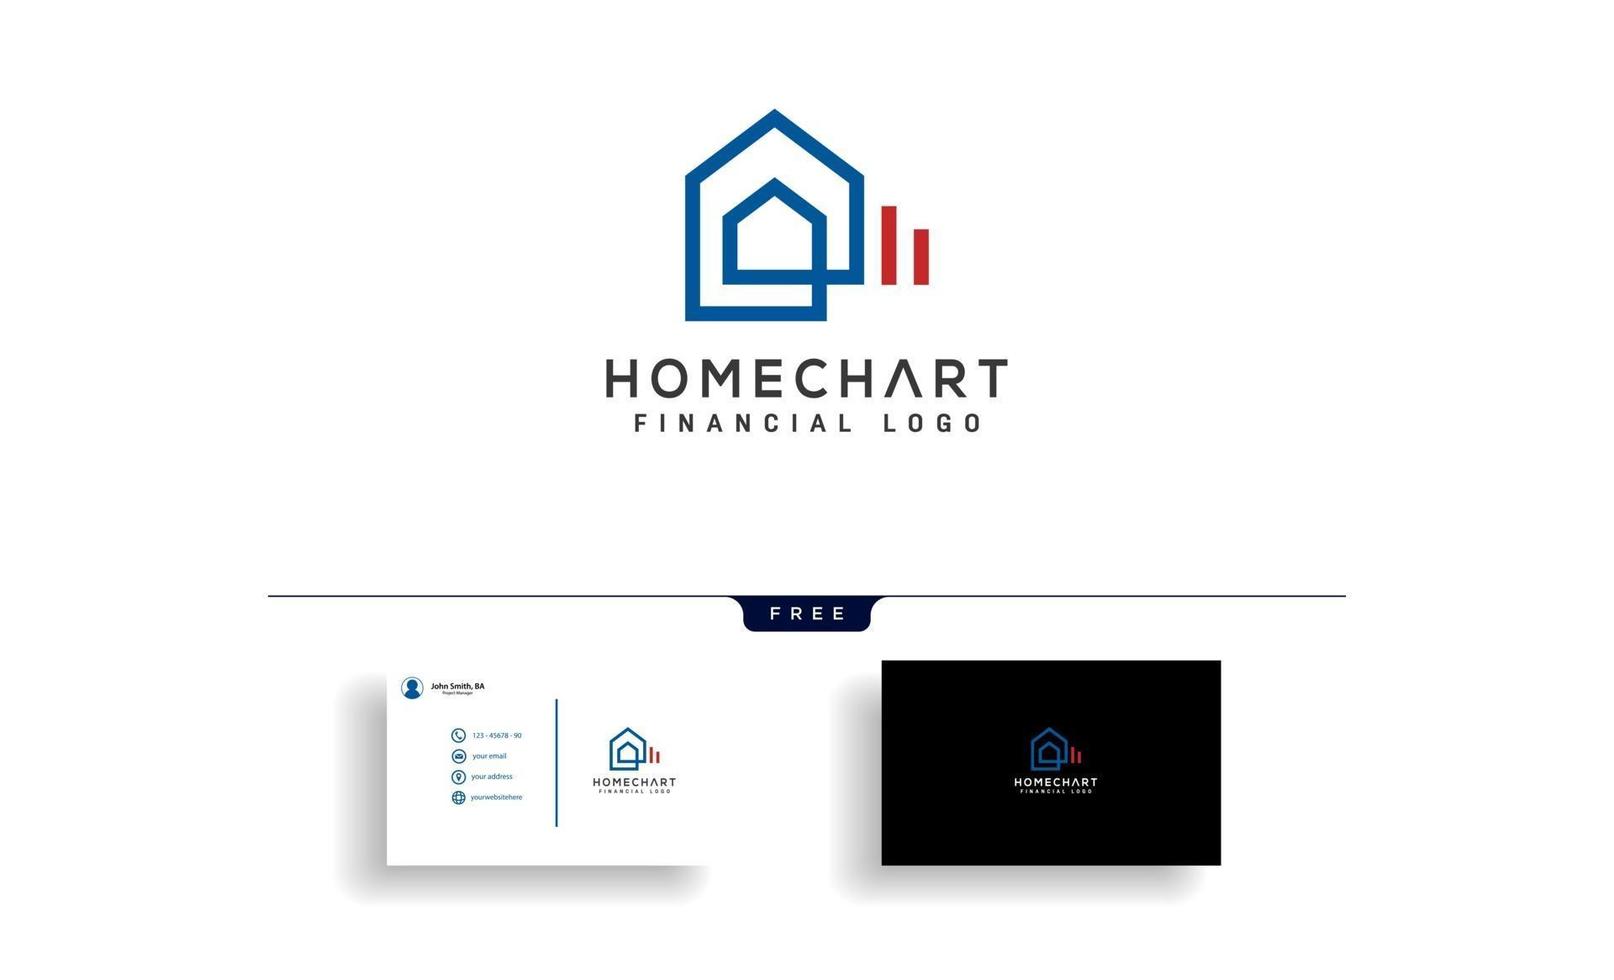 home chart financial logo template vector illustration icon elements isolated